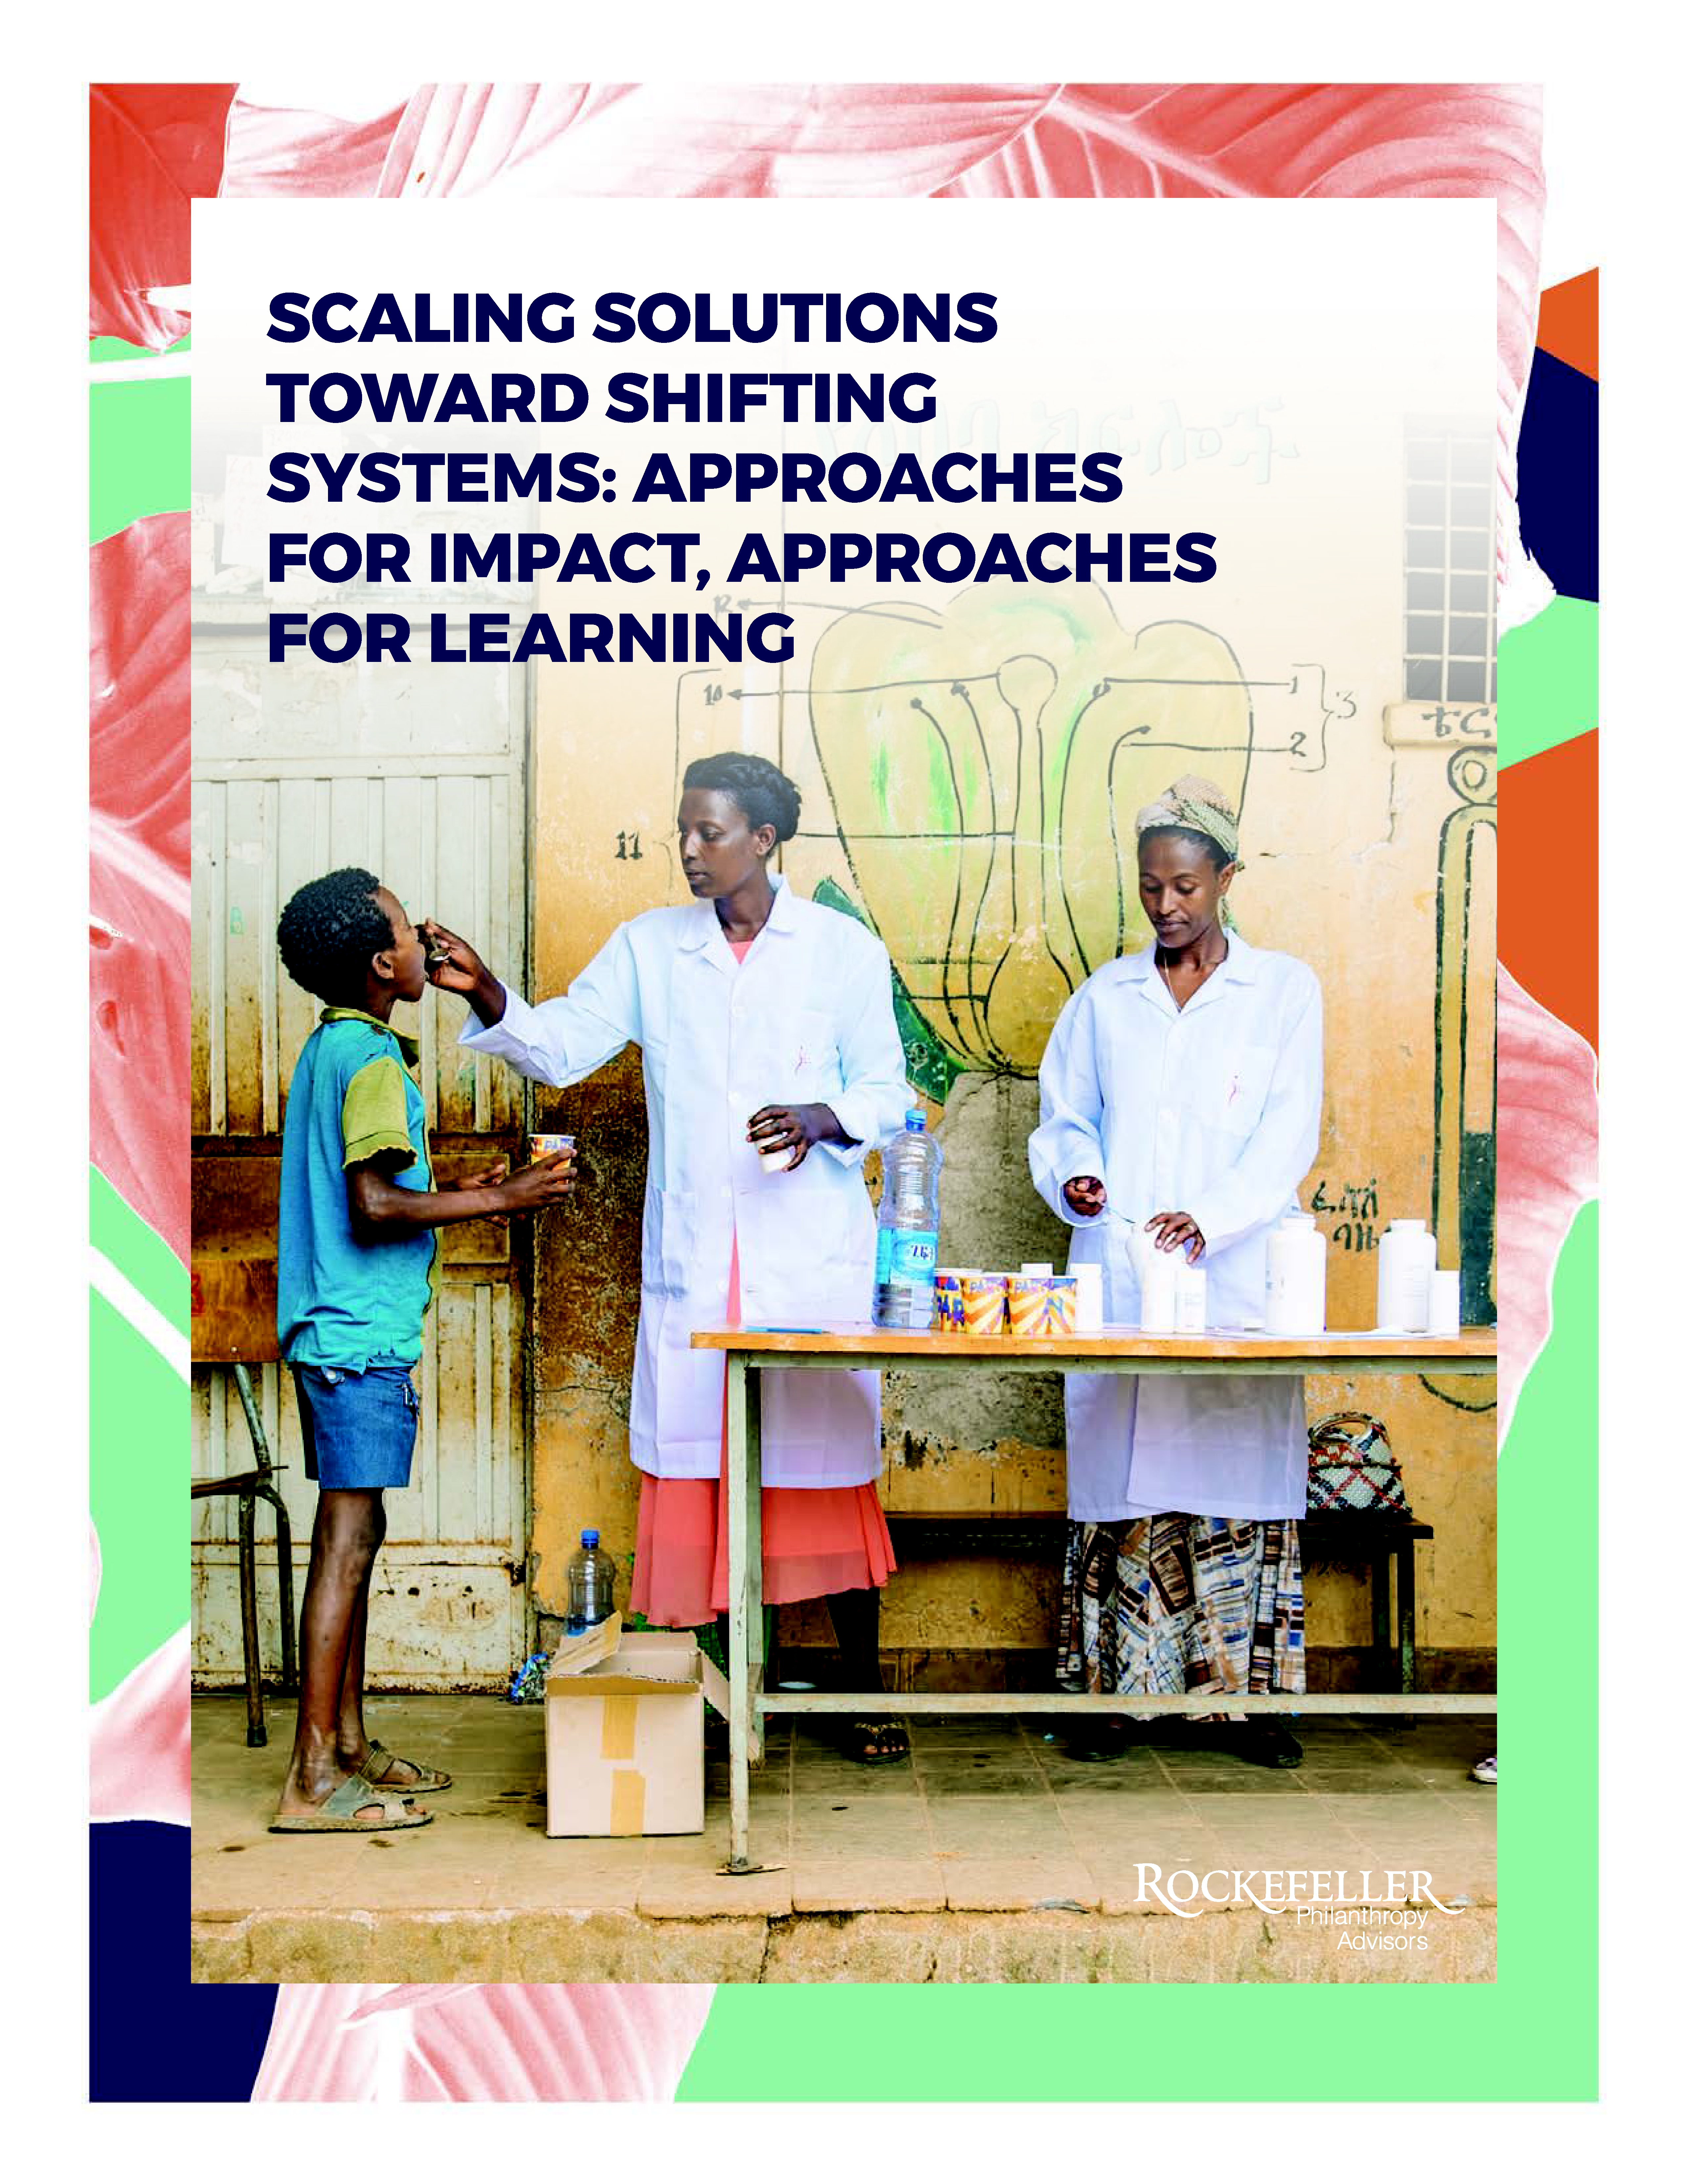 Scaling Solutions Toward Shifting Systems: Approaches for Impact, Approaches for Learning